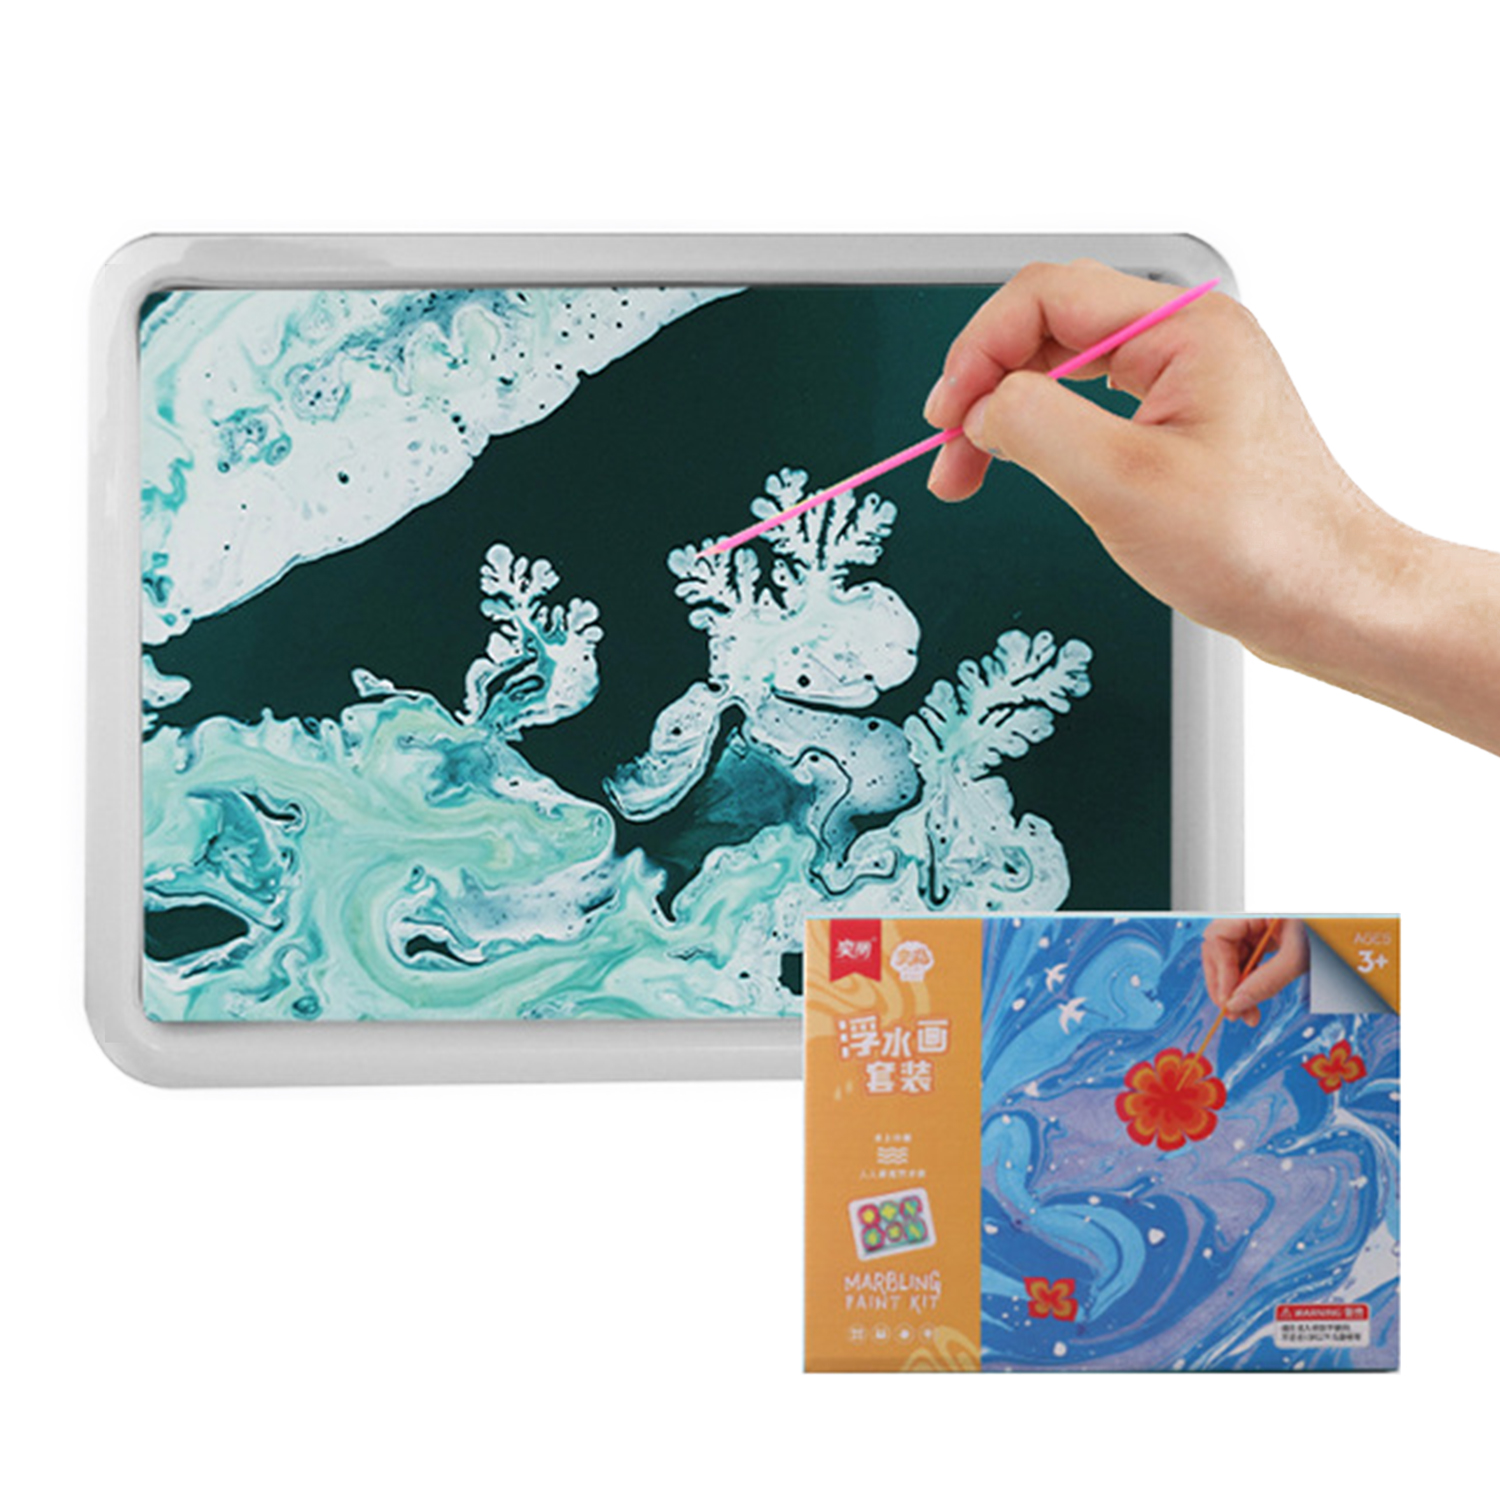 Fashion 6/12color paint kit for kids Floating Painting marbling ebru paint marble set wet Paint watercolor drawing/diy1